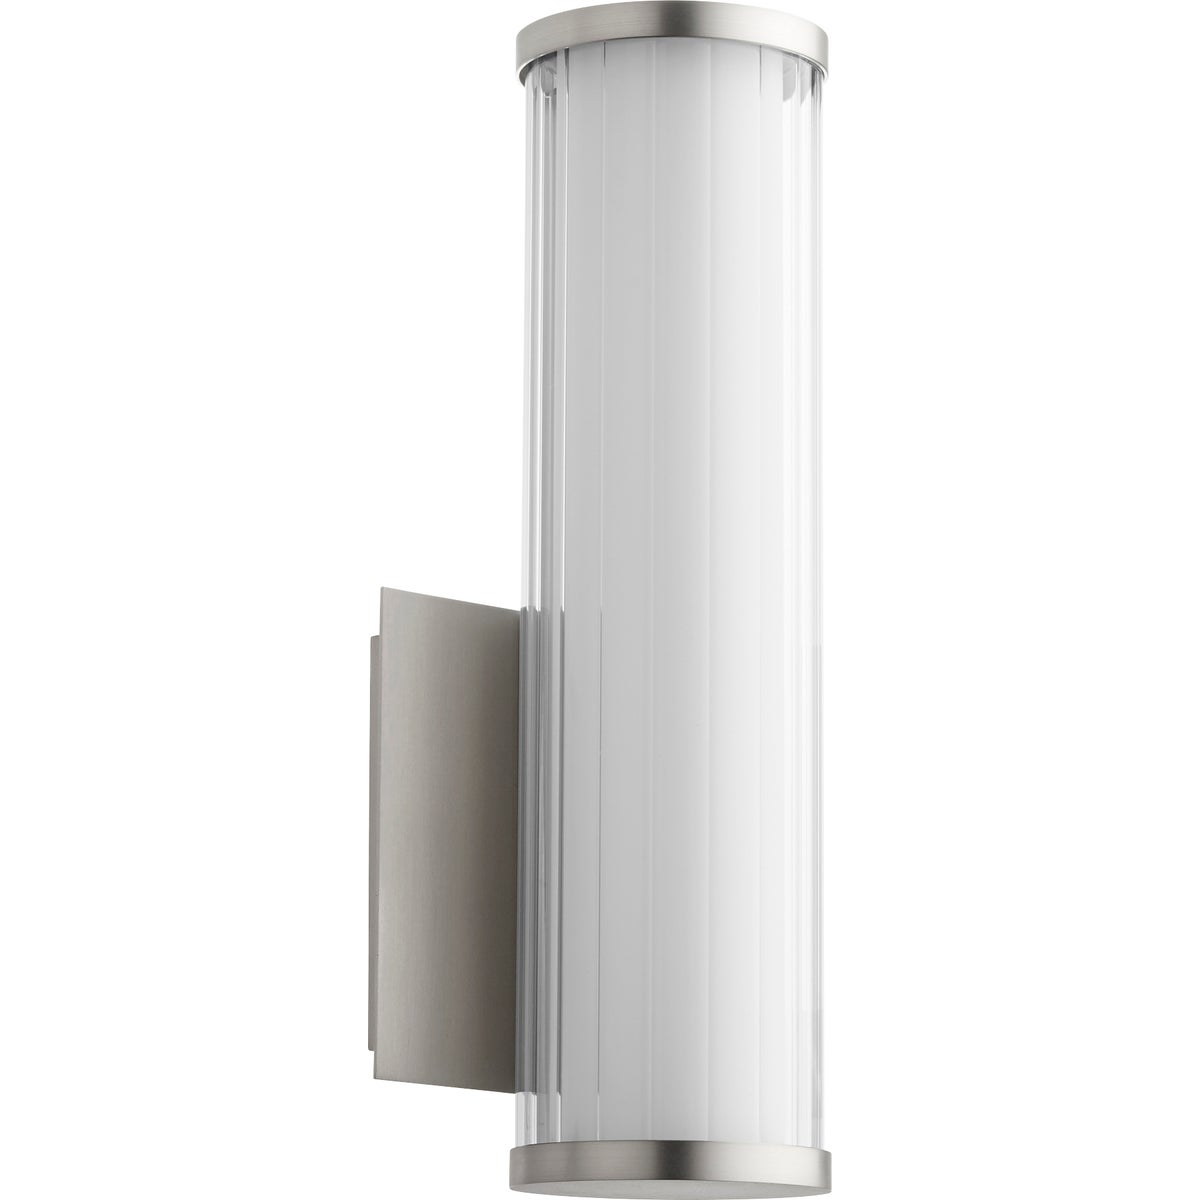 LED Wall Sconce with clean lines and subtle sophistication. Perfect for modern applications. 9W, 120V, 689 lumens, 3000K color temperature, CRI 90, dimmable. UL Listed, Damp Location. 2-year warranty.